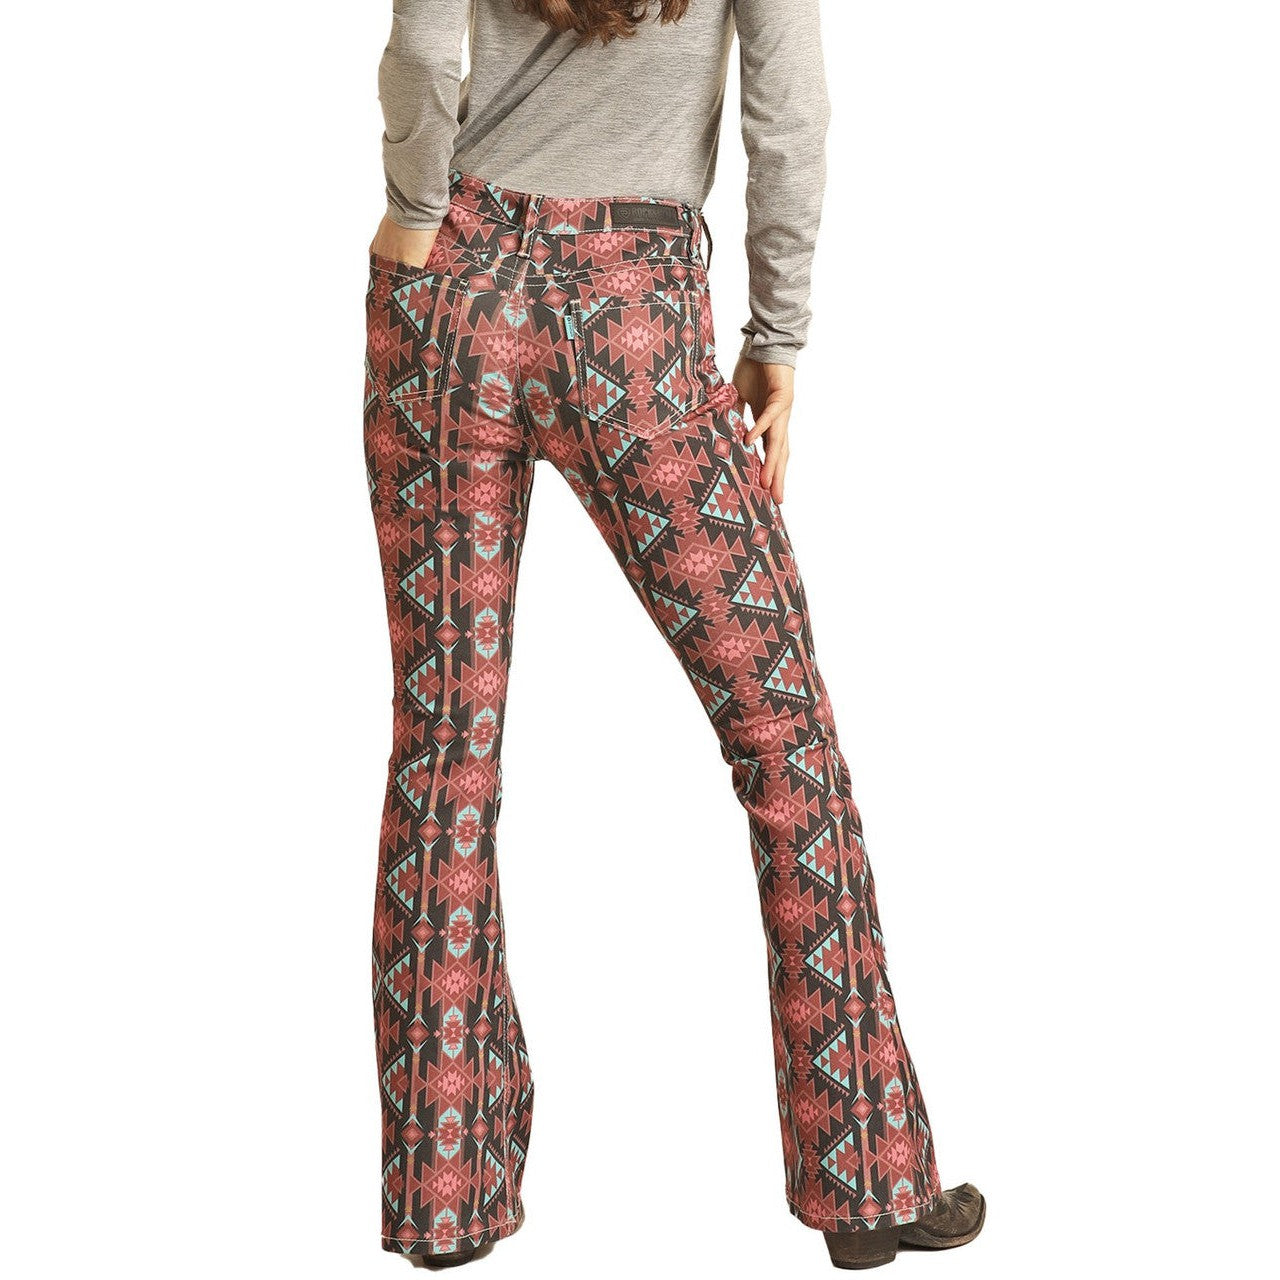 Rock & Roll Hooey Women's Aztec High Rise Extra Stretch Baby Flare Jeans - Pink/Black